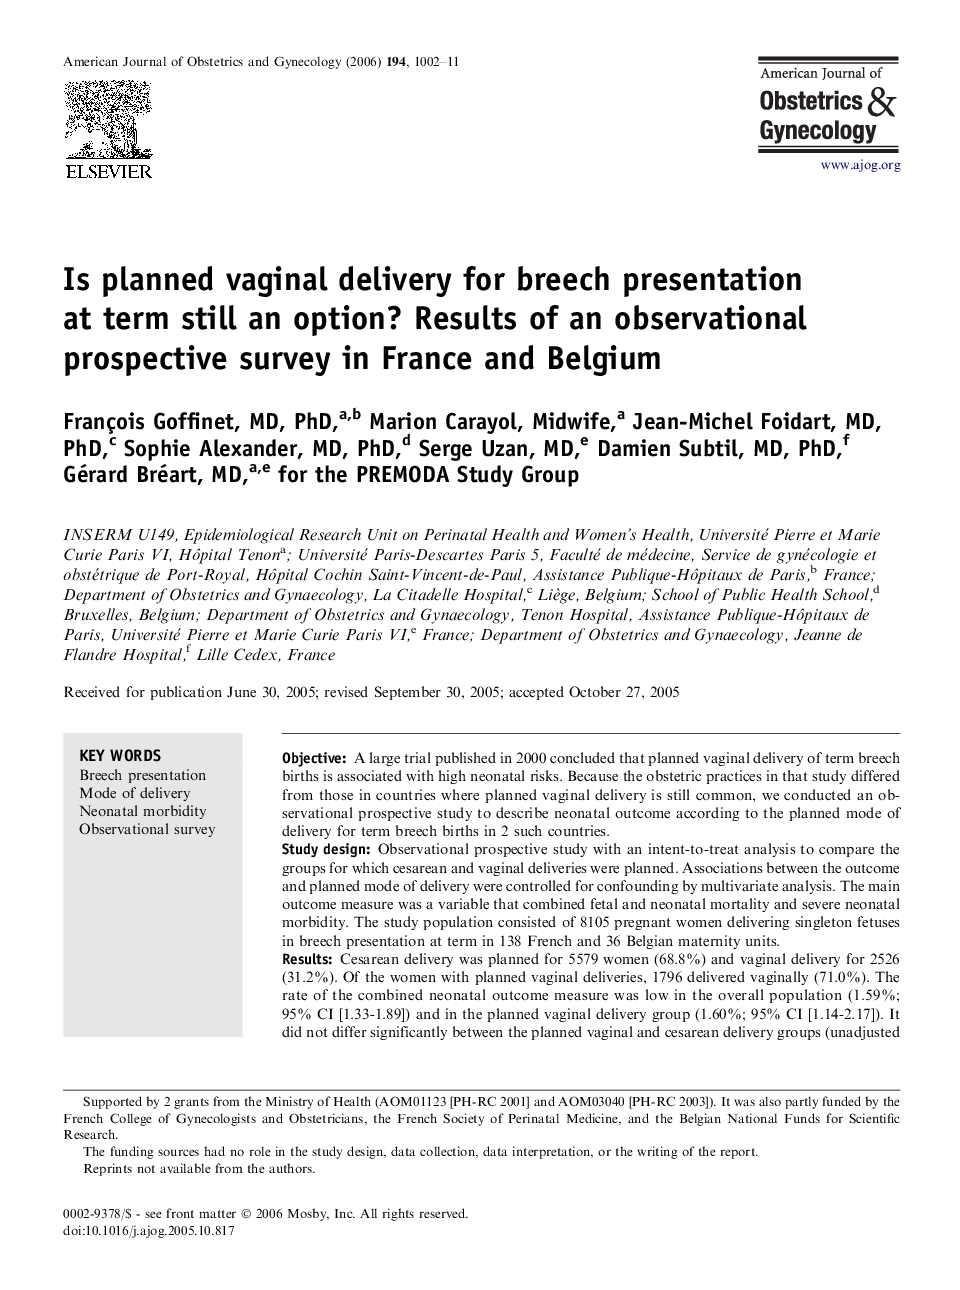 Is planned vaginal delivery for breech presentation at term still an option? Results of an observational prospective survey in France and Belgium 